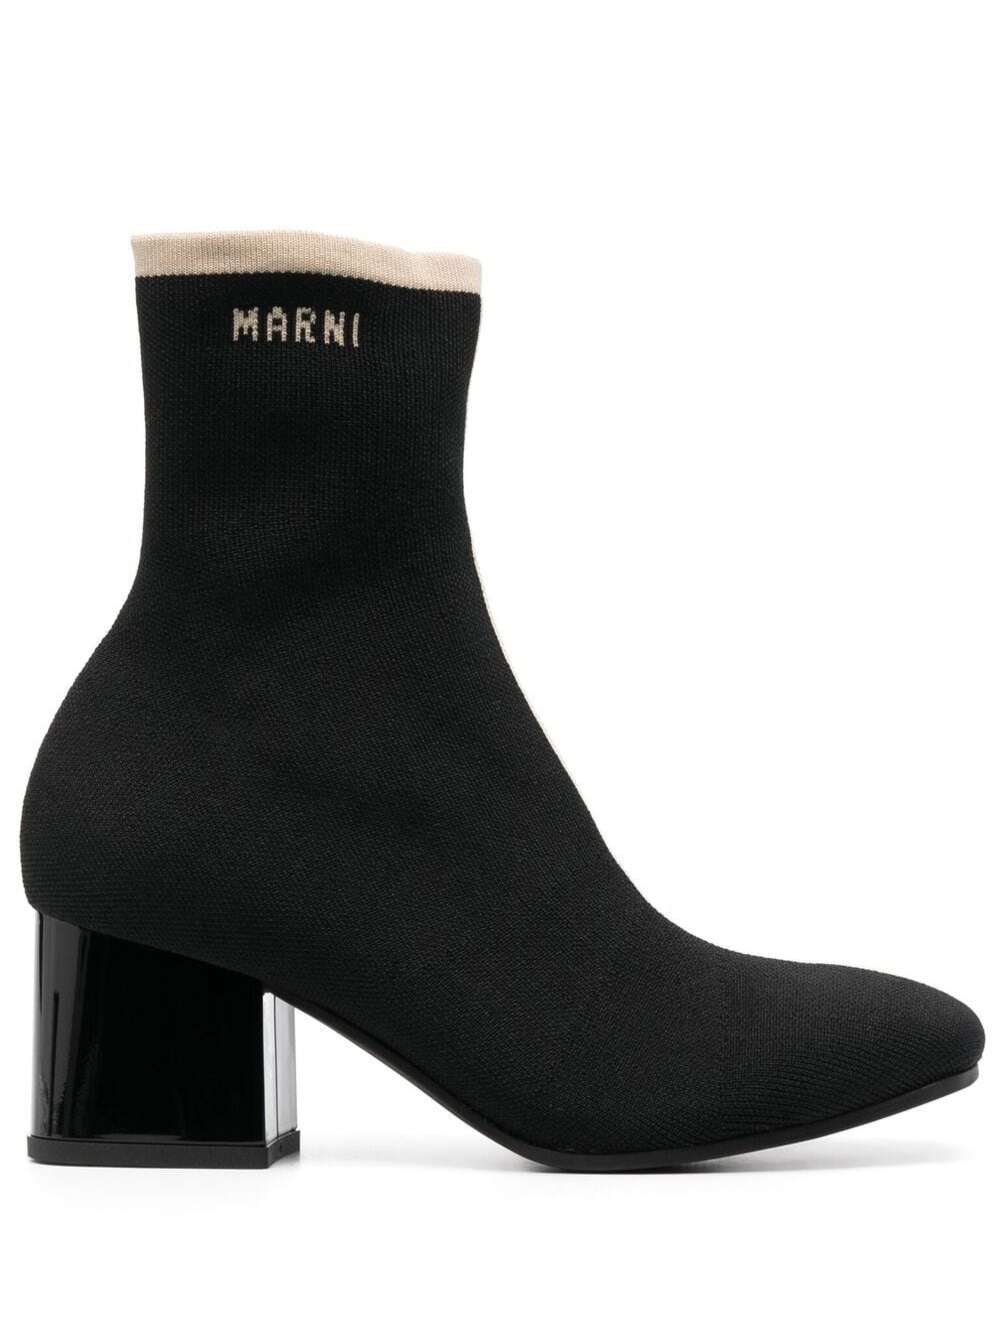 Shop Marni Black Ankle Boot In Leather With Medium And Wide Heel Ecru-colored Details